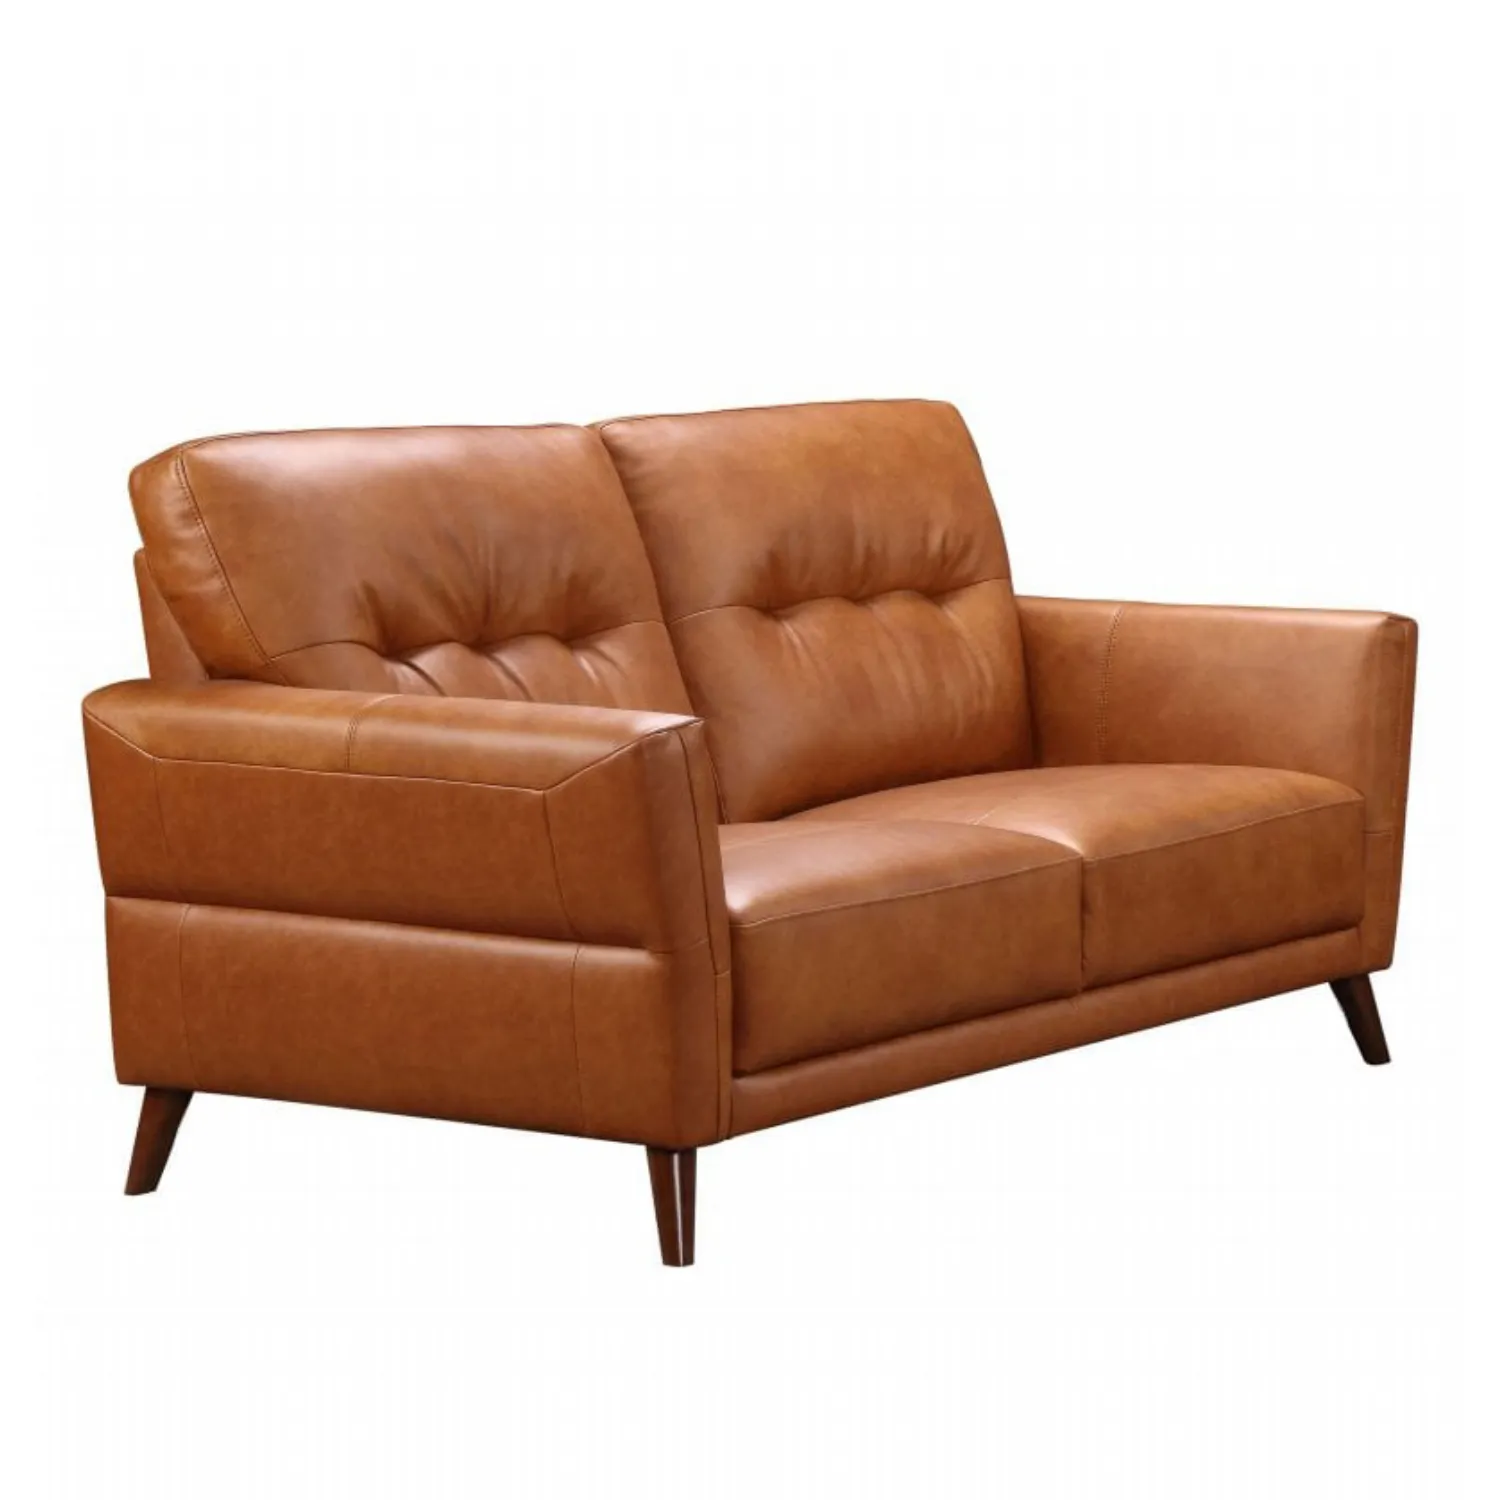 Tan Brown Leather Upholstered 2 Seater Sofa